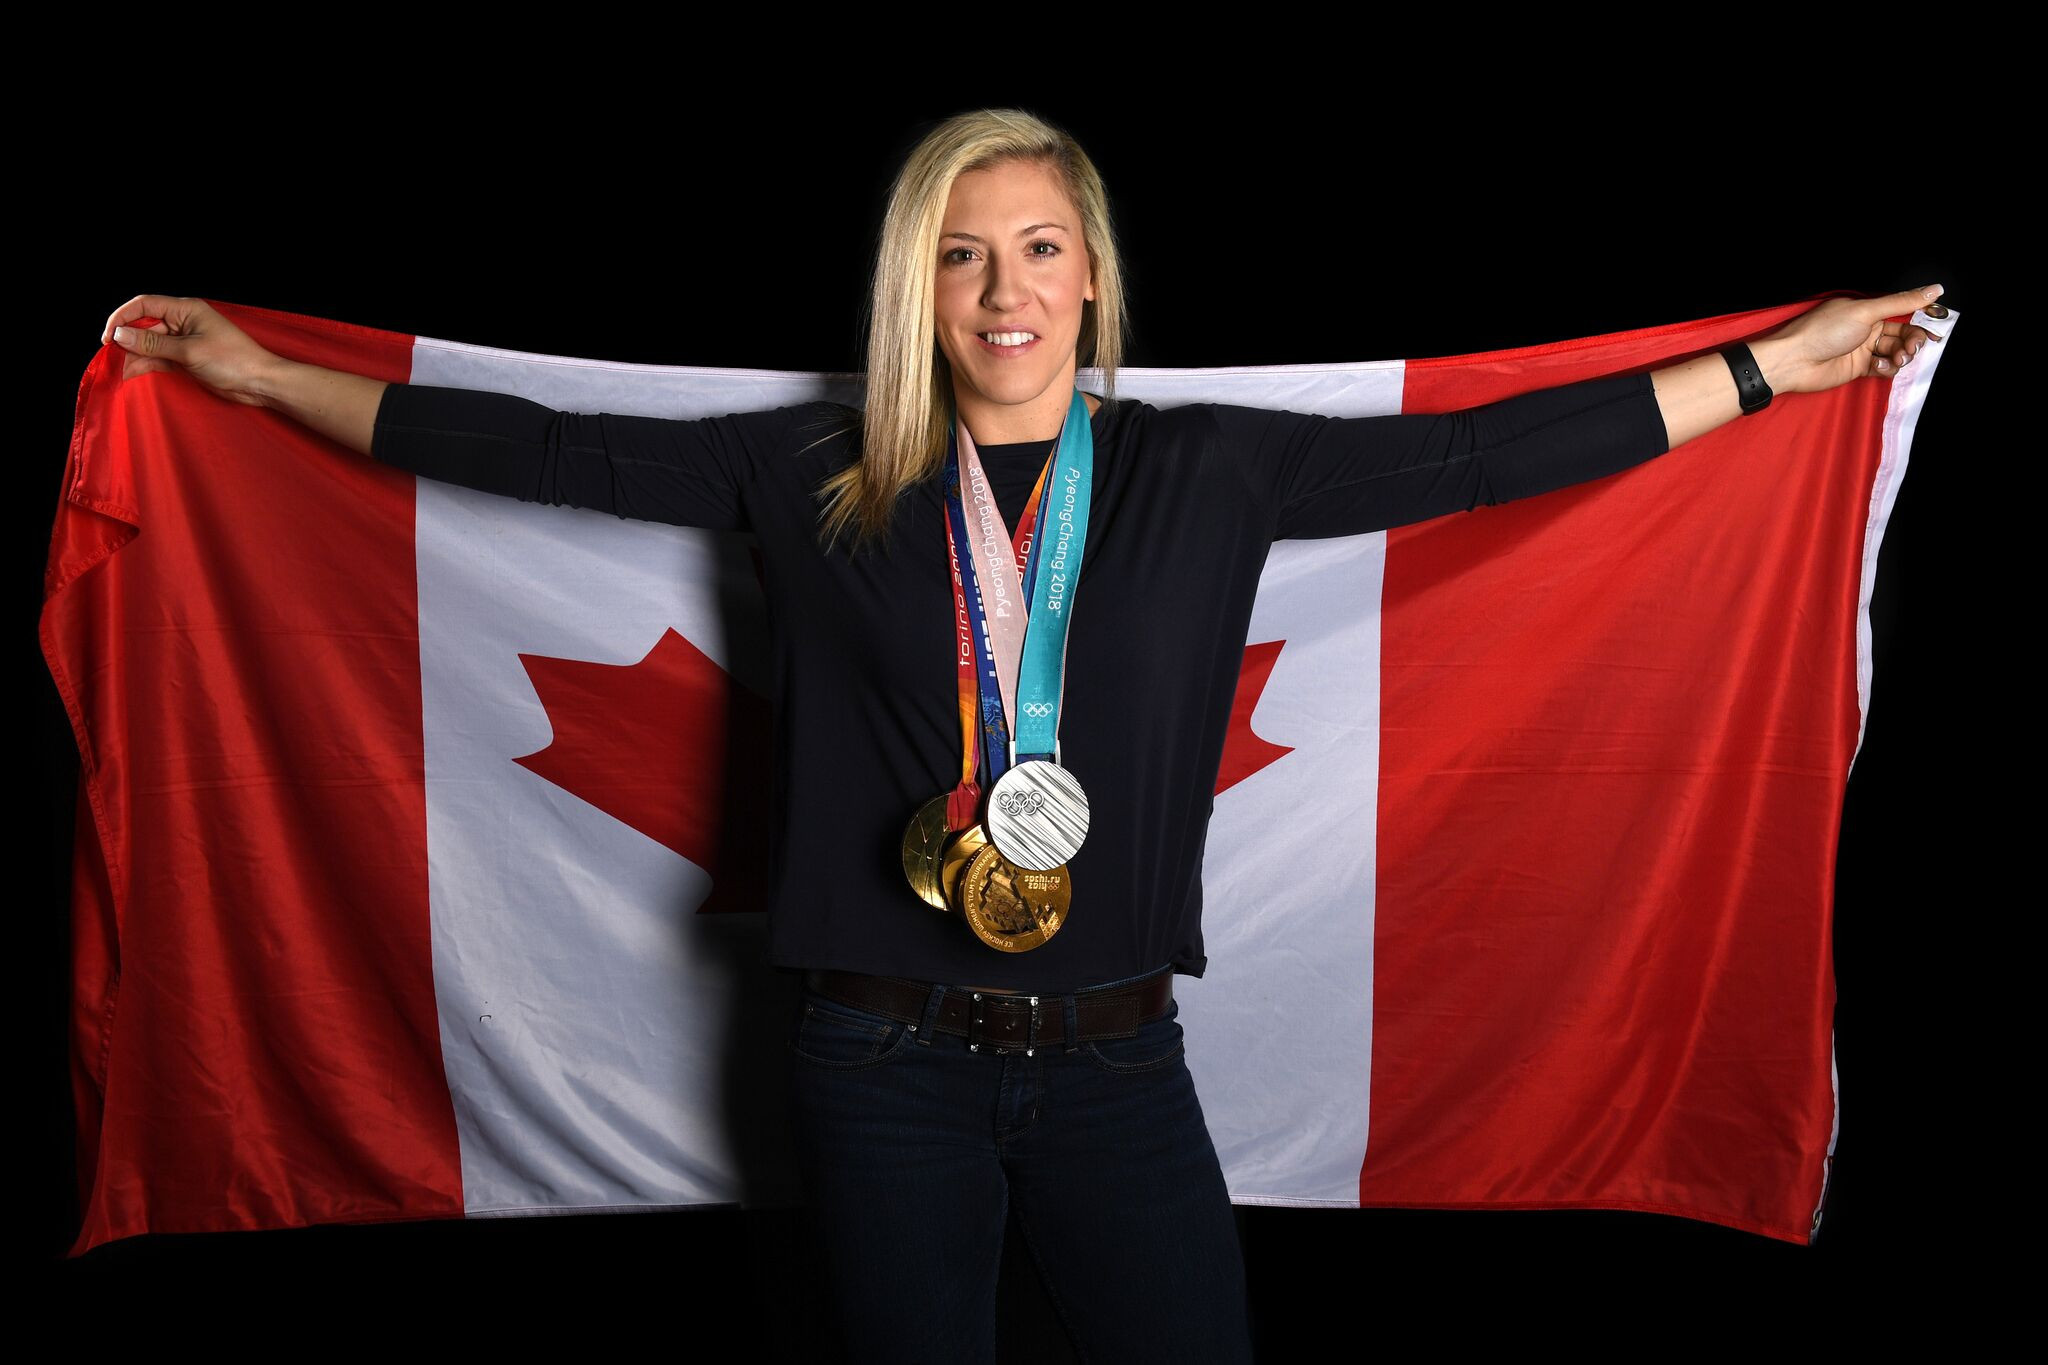 Three-time Olympic champion Meghan Agosta retires from Canadian ice hockey team